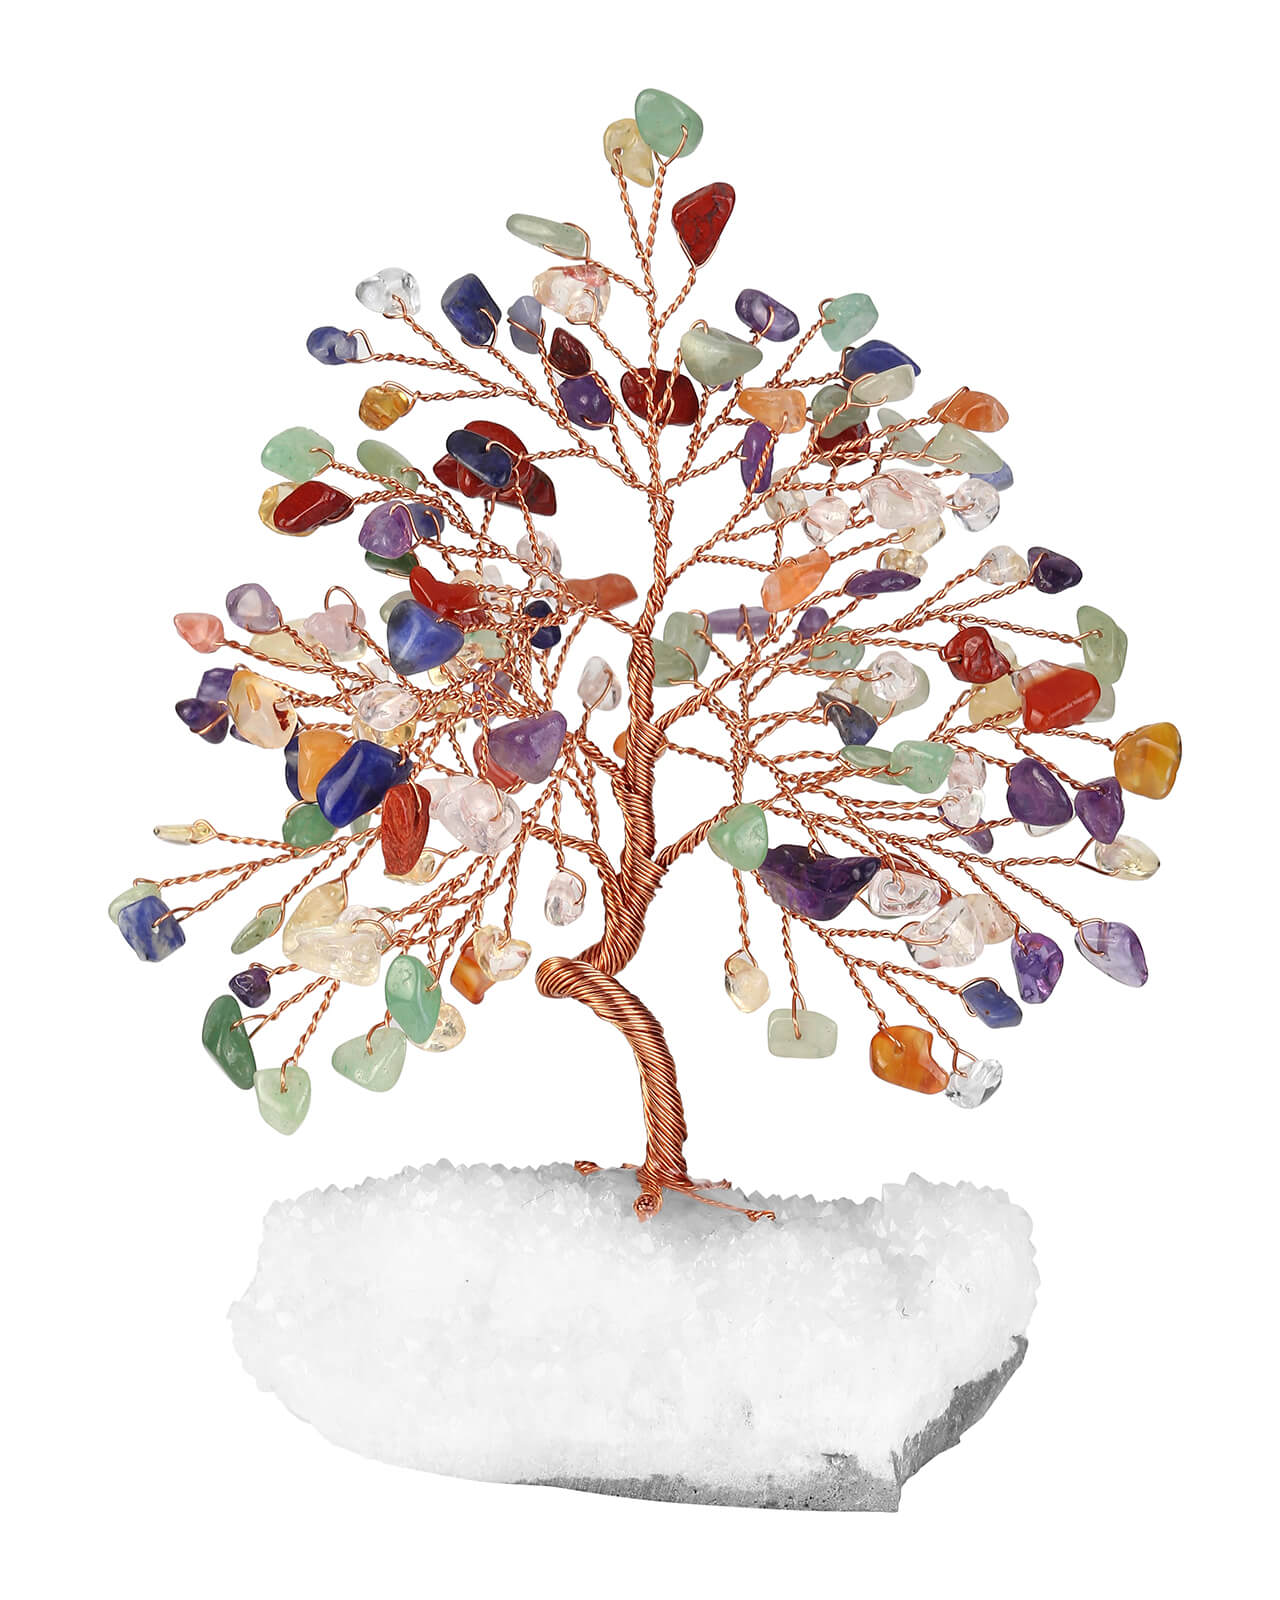 Healing Crystals Money Tree with Base Feng Shui Ornament | Jovivi